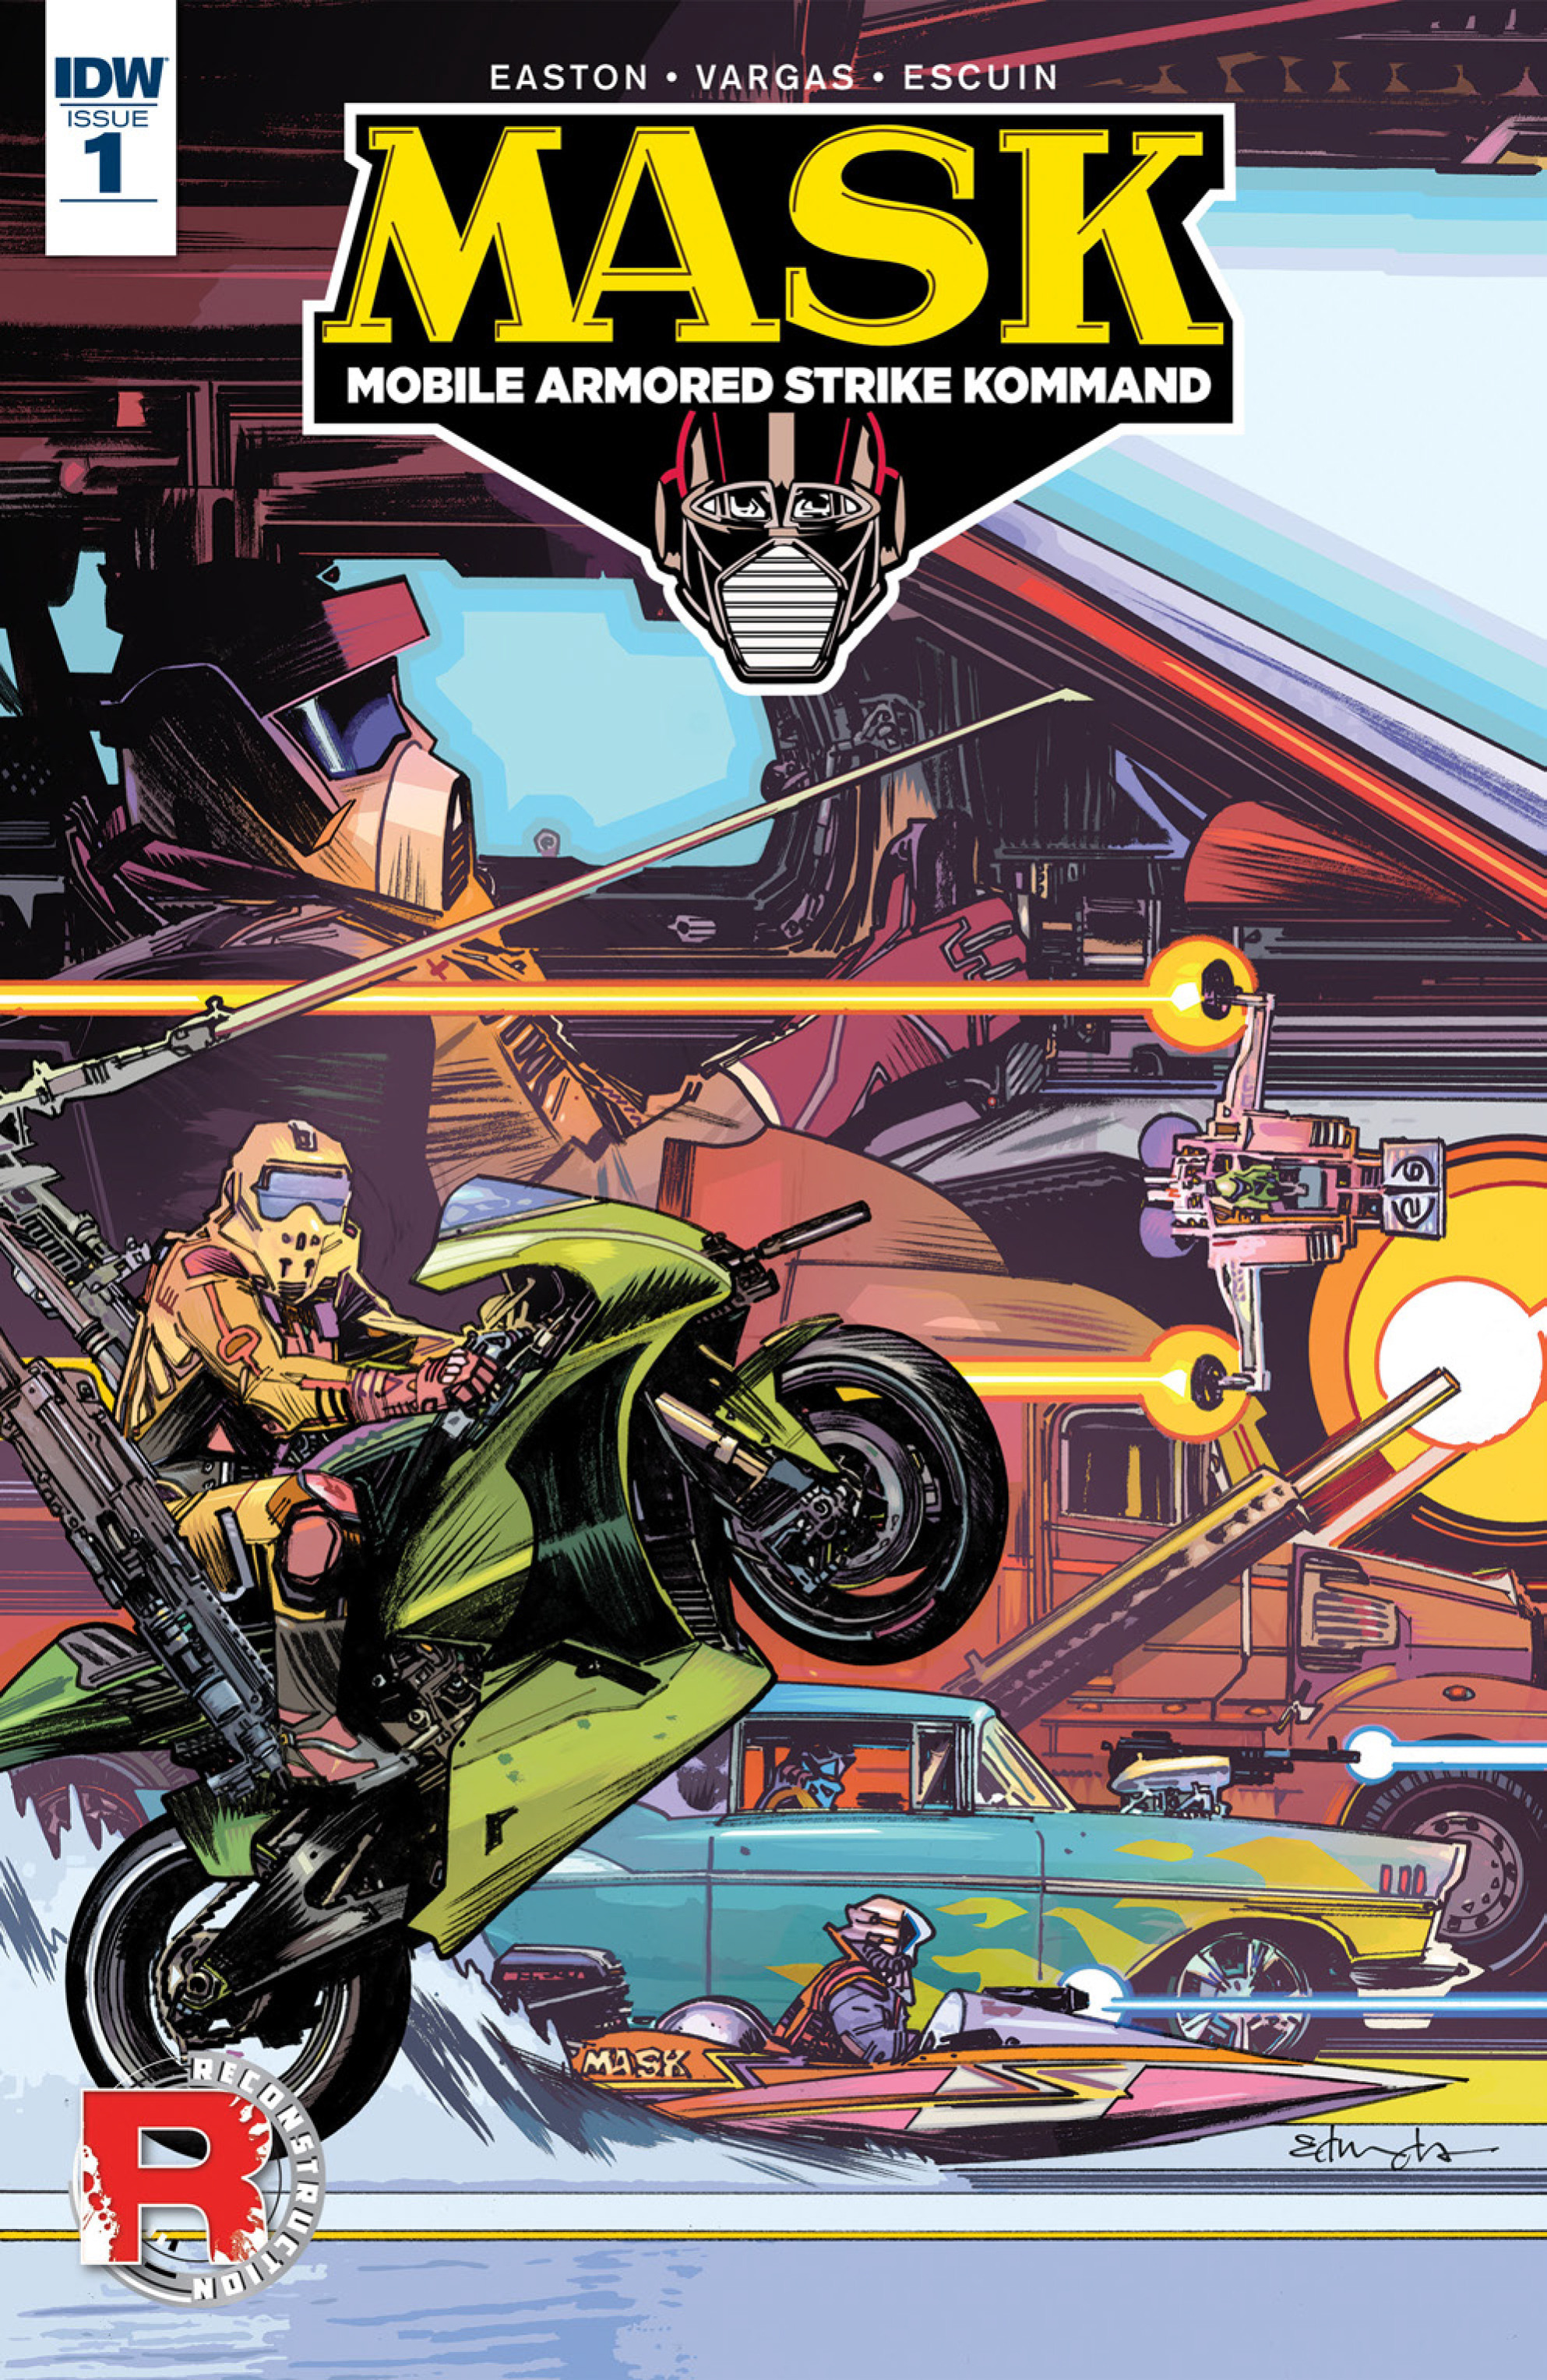 Read online M.A.S.K.: Mobile Armored Strike Kommand comic -  Issue #1 - 1